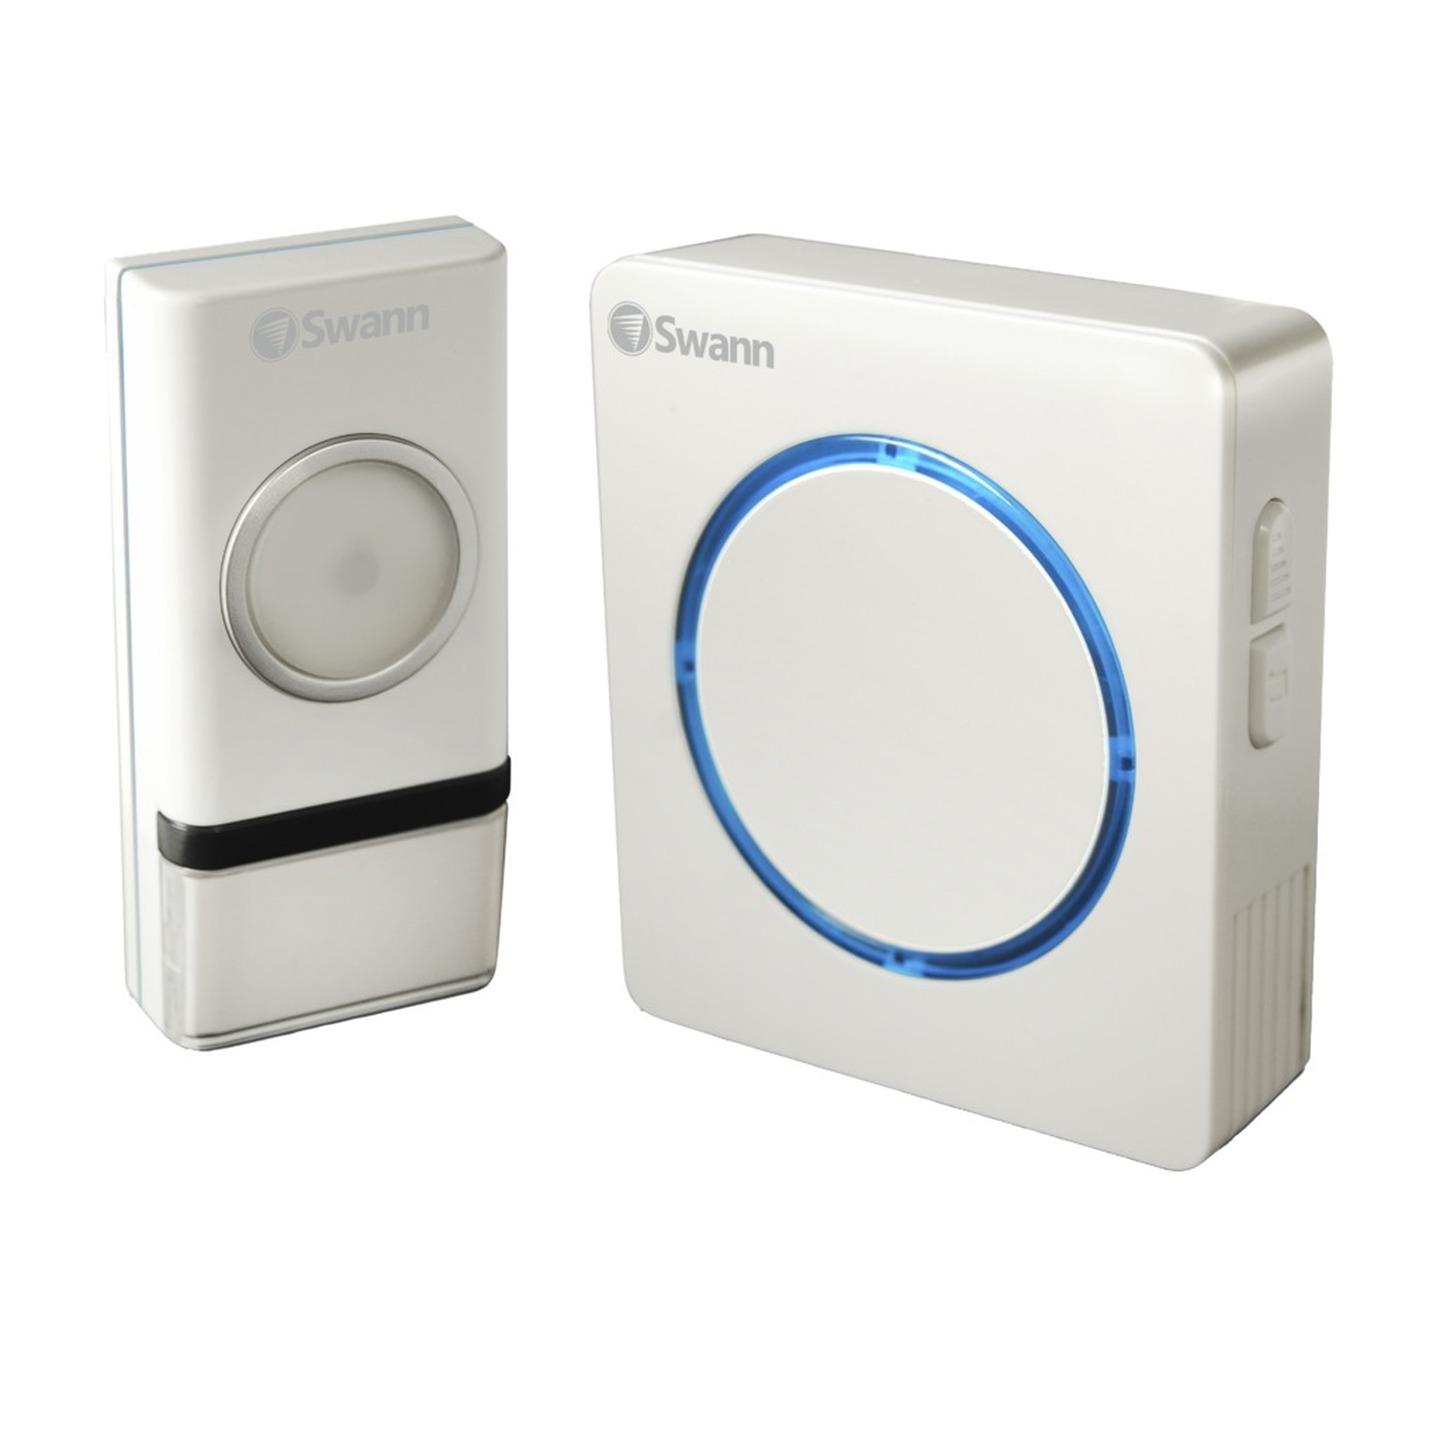 Swann Compact Wireless Door Chime with Backlight